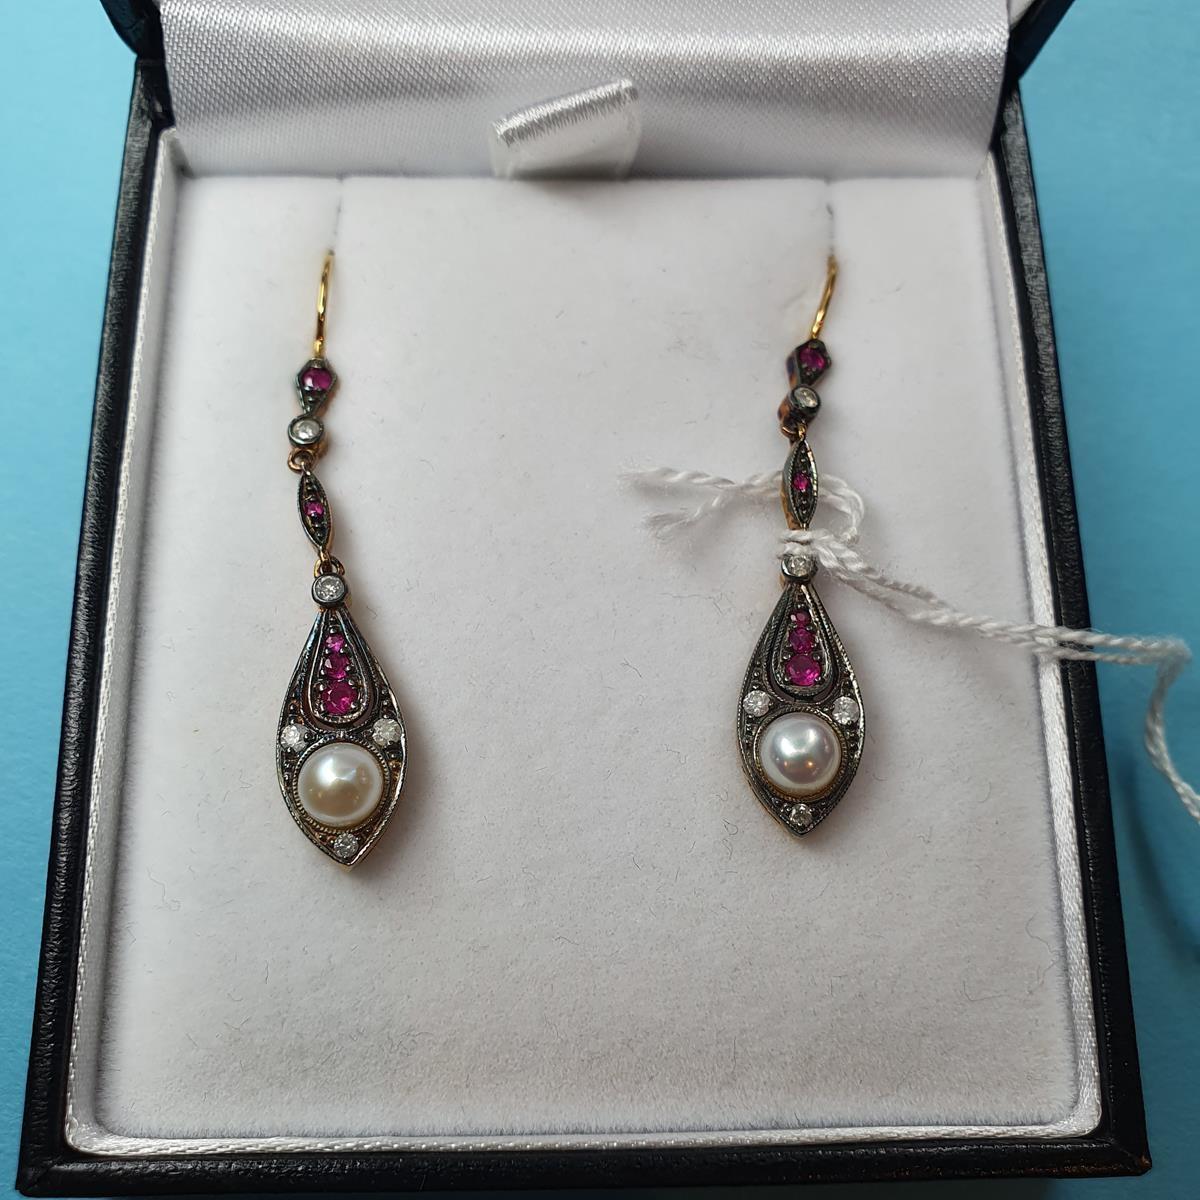 A pair of drop earrings set with rubies, diamonds and pearls - Image 2 of 4